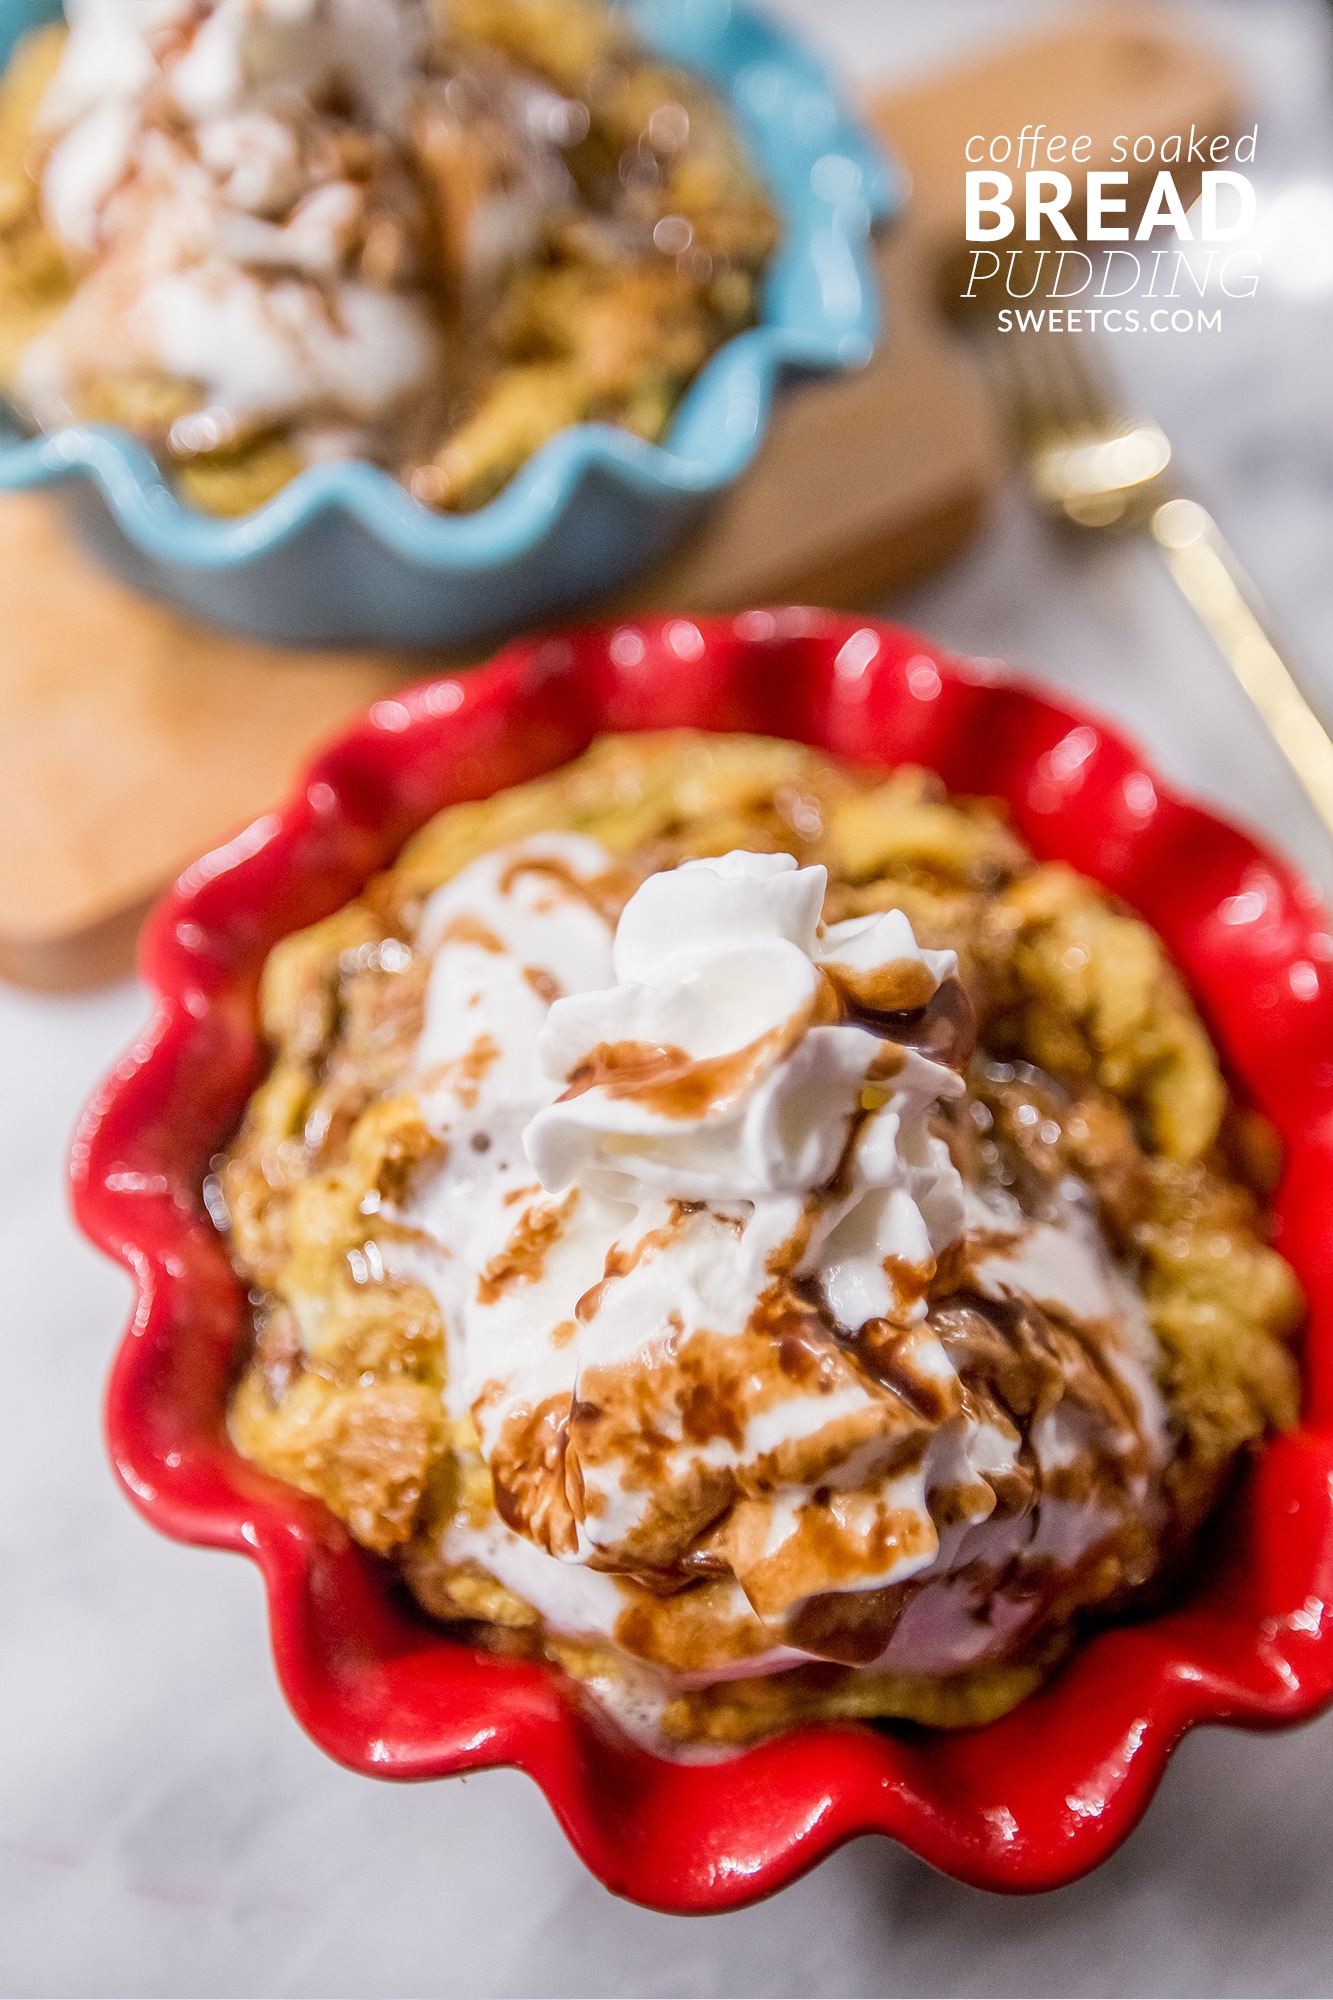 This coffee soaked bread pudding is so delicious- you wont believe the secret ingredient!